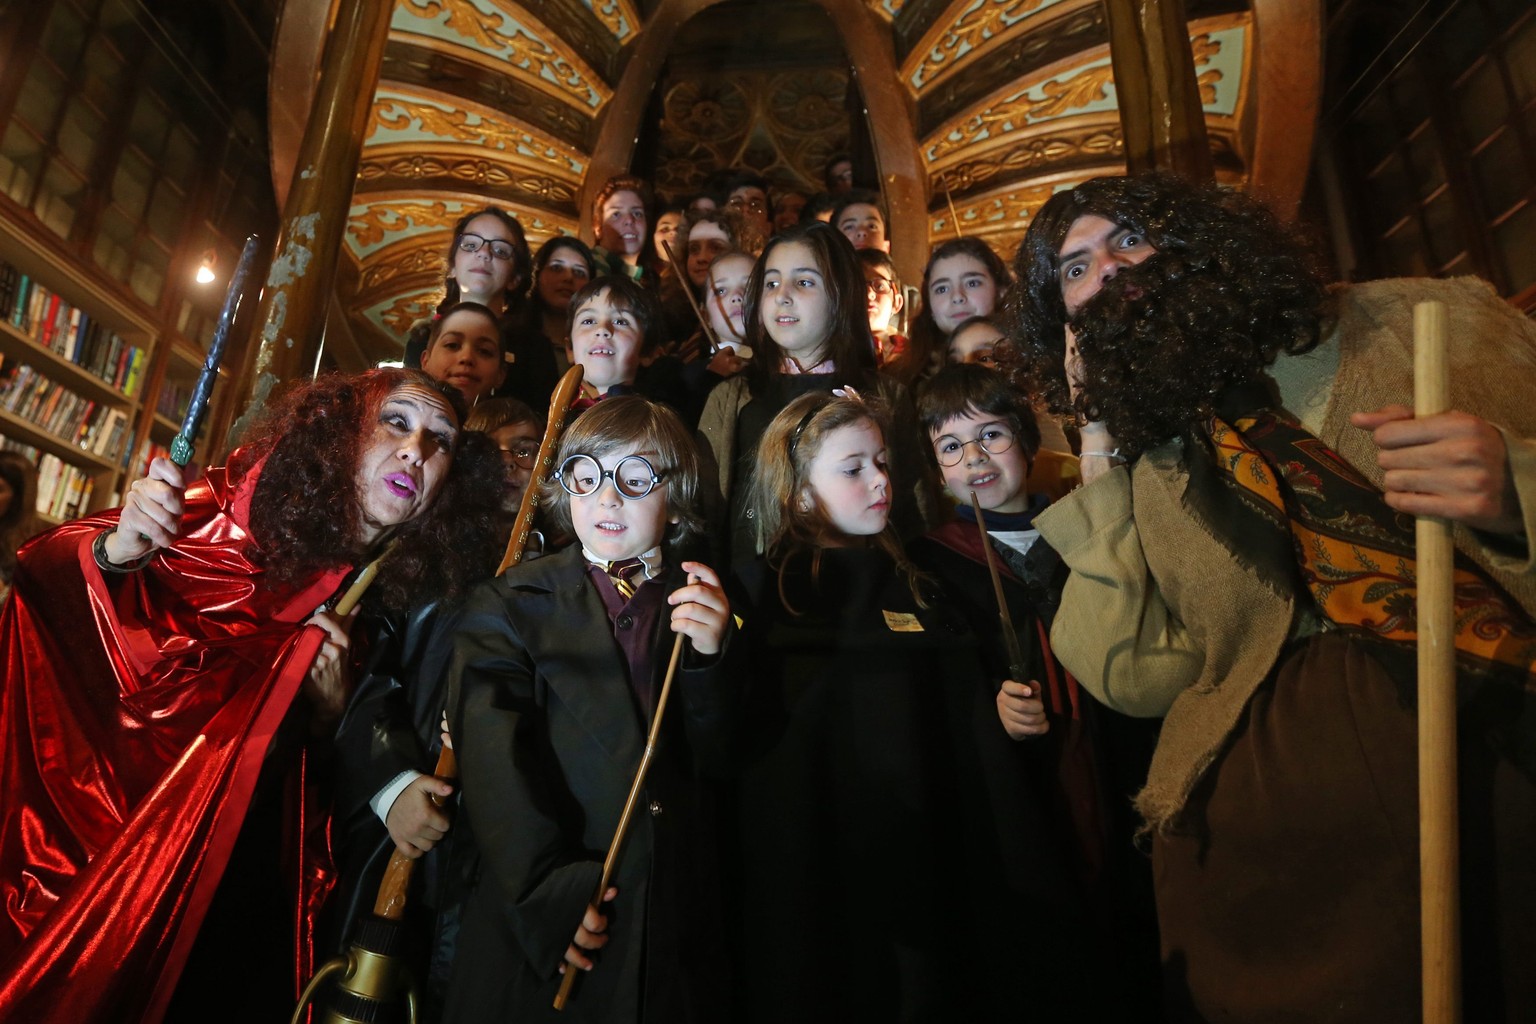 epa05143585 Children wearing costumes take part in the Harry Potter Book Night held in Lello Bookshop in Porto, Portugal, 04 February 2016. The events is held to celebrate the British author J.K. Rowl ...